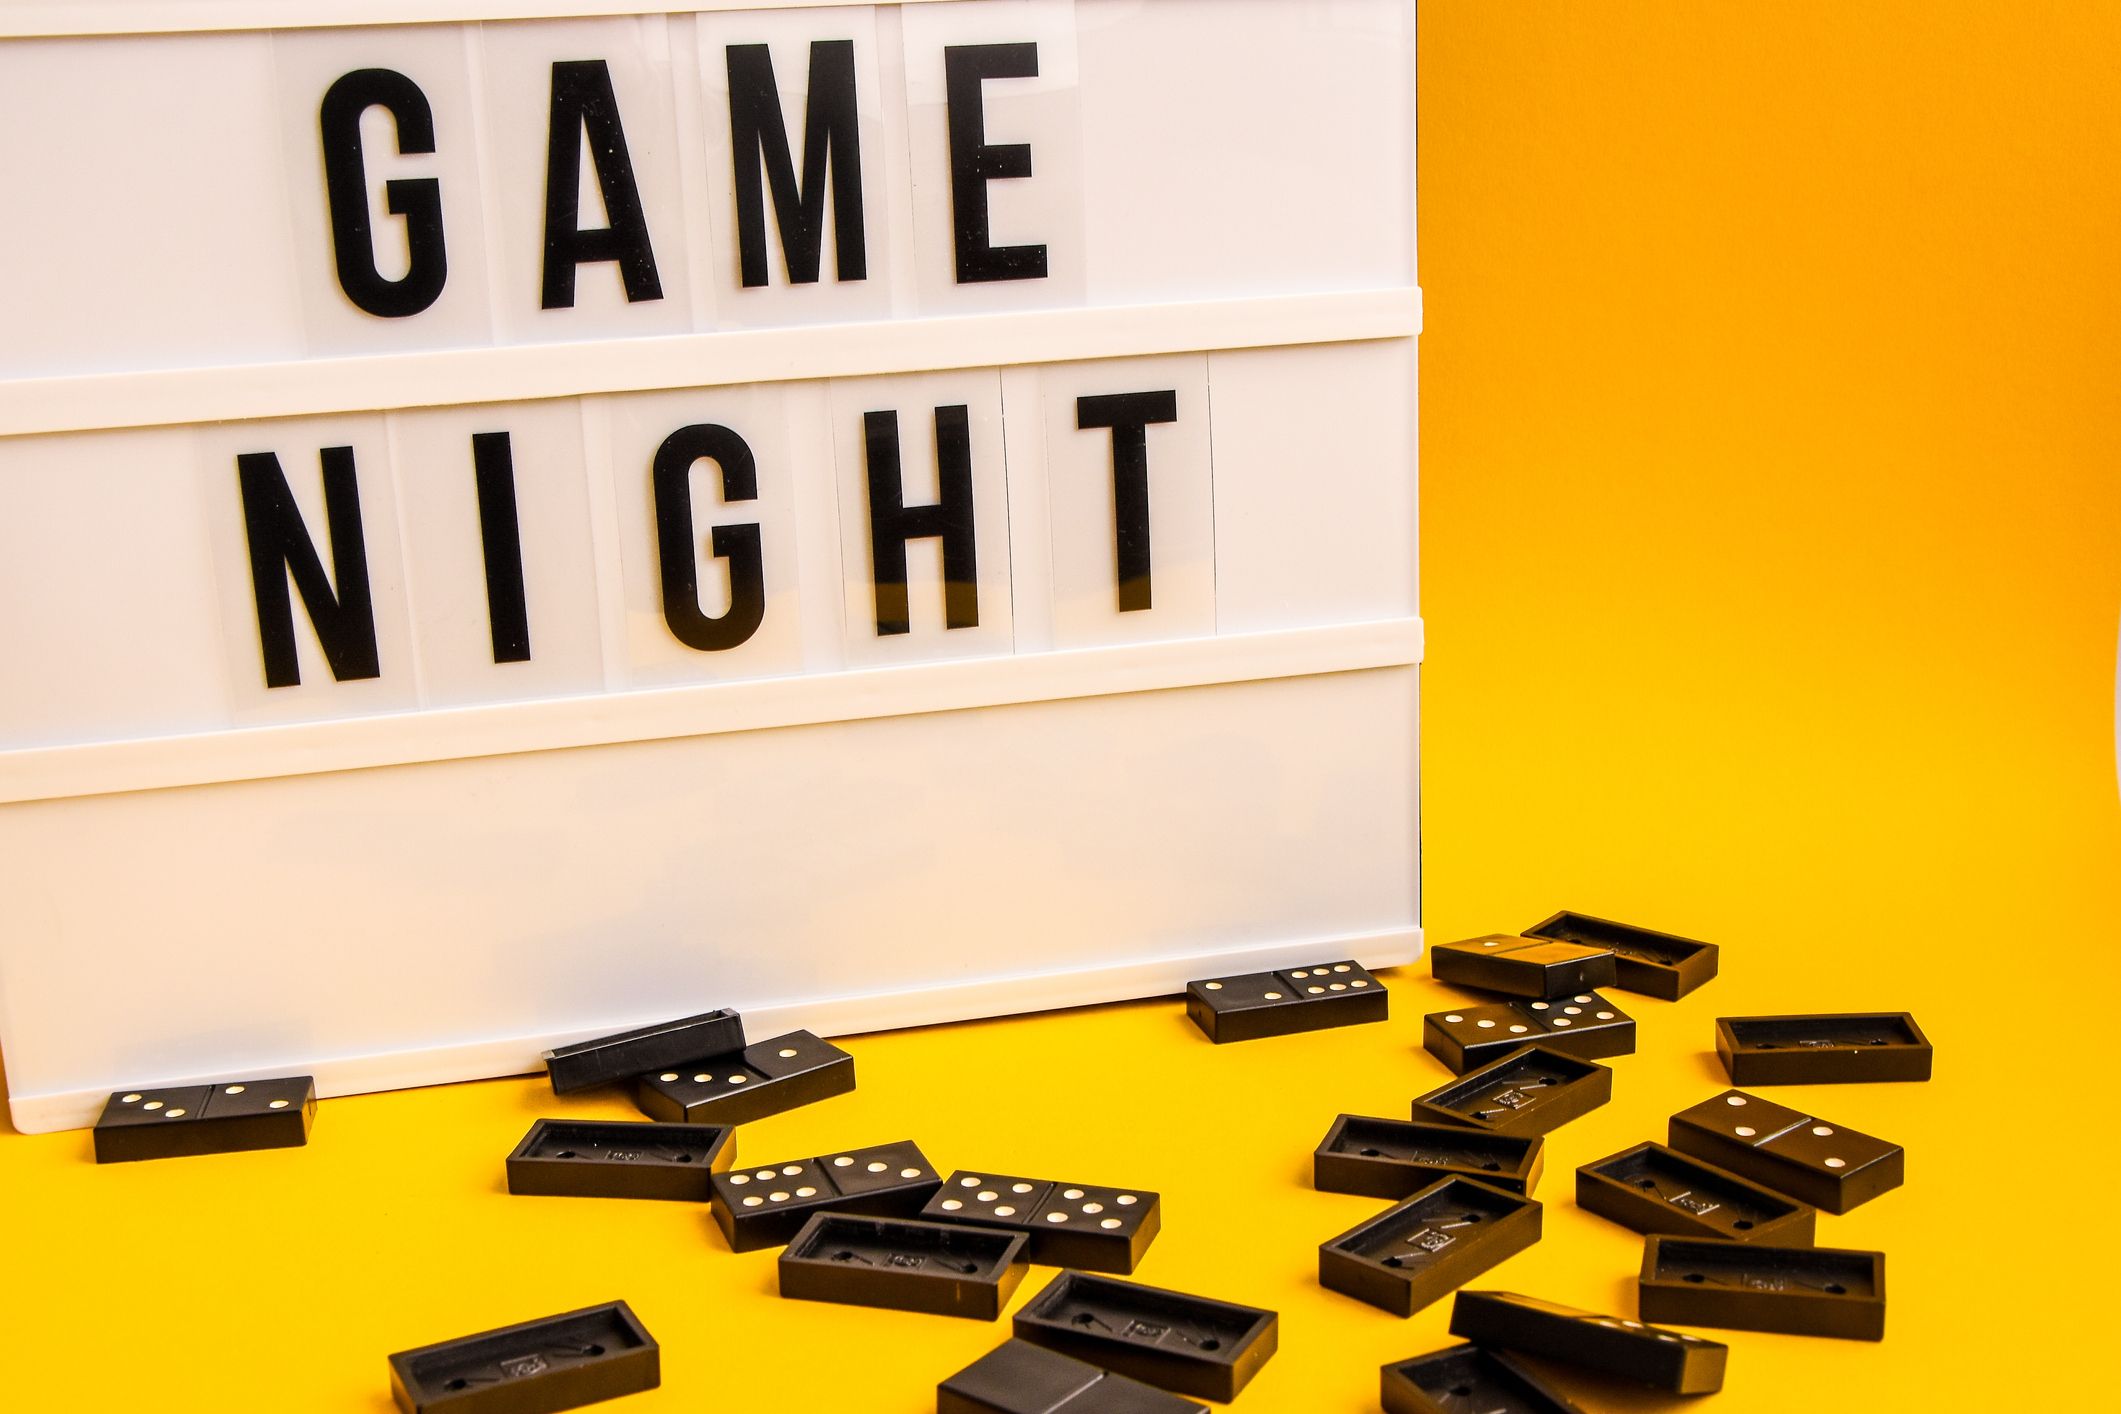 Ideas for Throwing a Virtual Game Night While Social Distancing